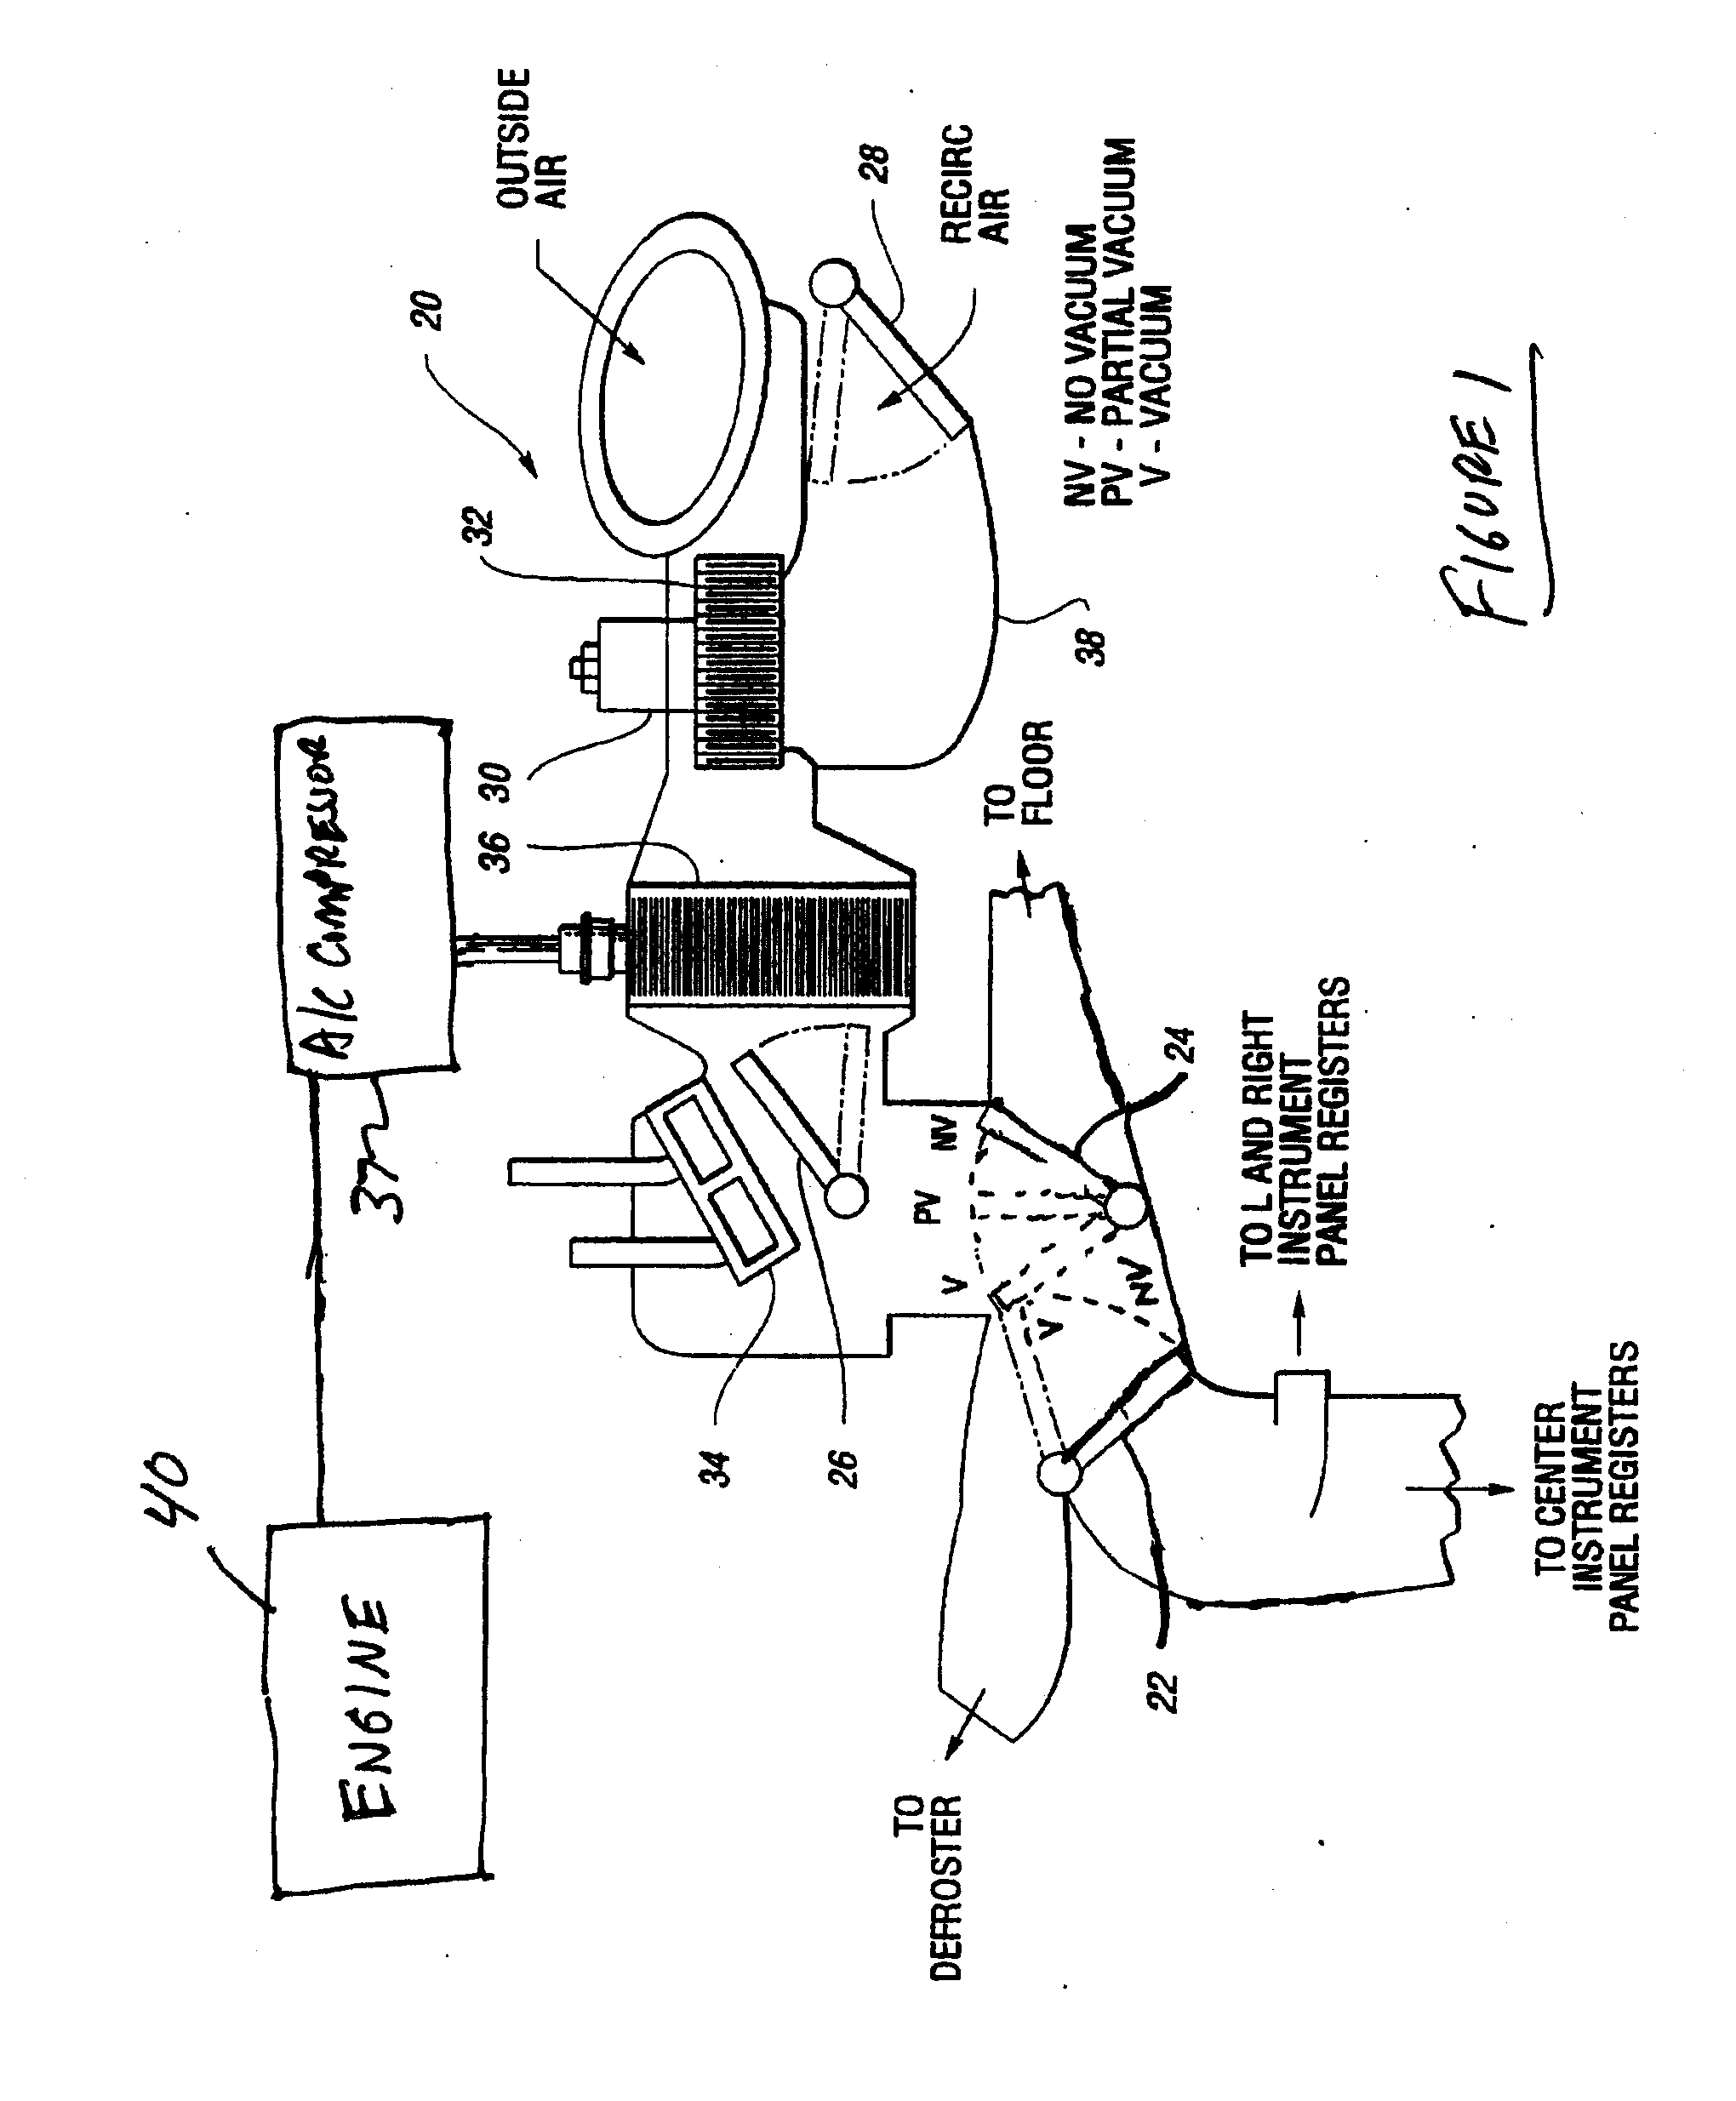 Hybrid-electric vehicle with automatic climate control strategy